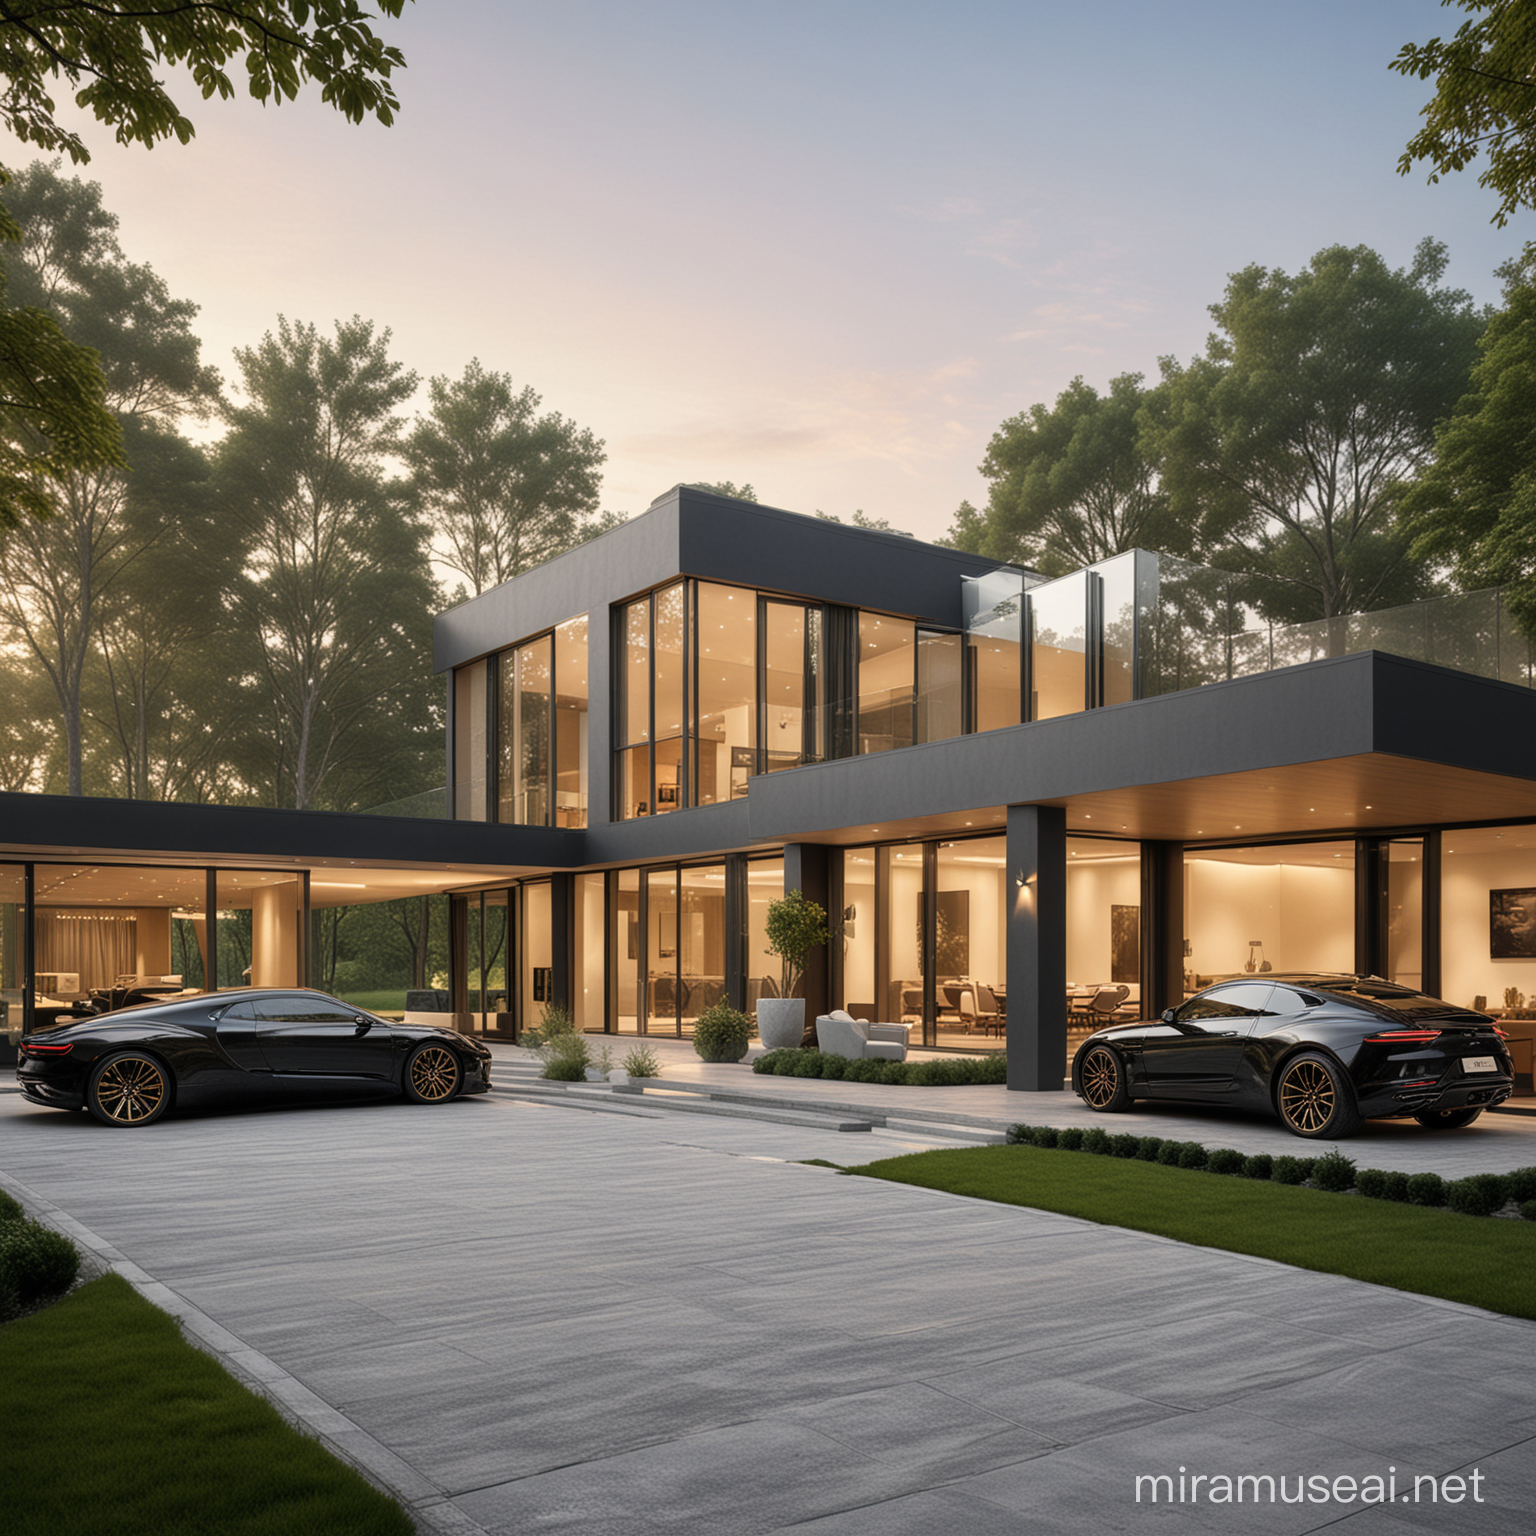 "Create an image of a modern luxury house with a flat roof and large glass windows, The house should have multiple levels with visible interior spaces, suggesting a spacious and open design. In the driveway, there should be two high-end sports Golden Colored cars parked, one with a sleek silver design and the other in a deep black finish. The scene should evoke a sense of exclusivity, privacy, and harmony with nature. The lighting should be soft and natural, as if it's early morning with the sun gently illuminating the scene. Add a touch of luxury and sophistication to the entire setting."